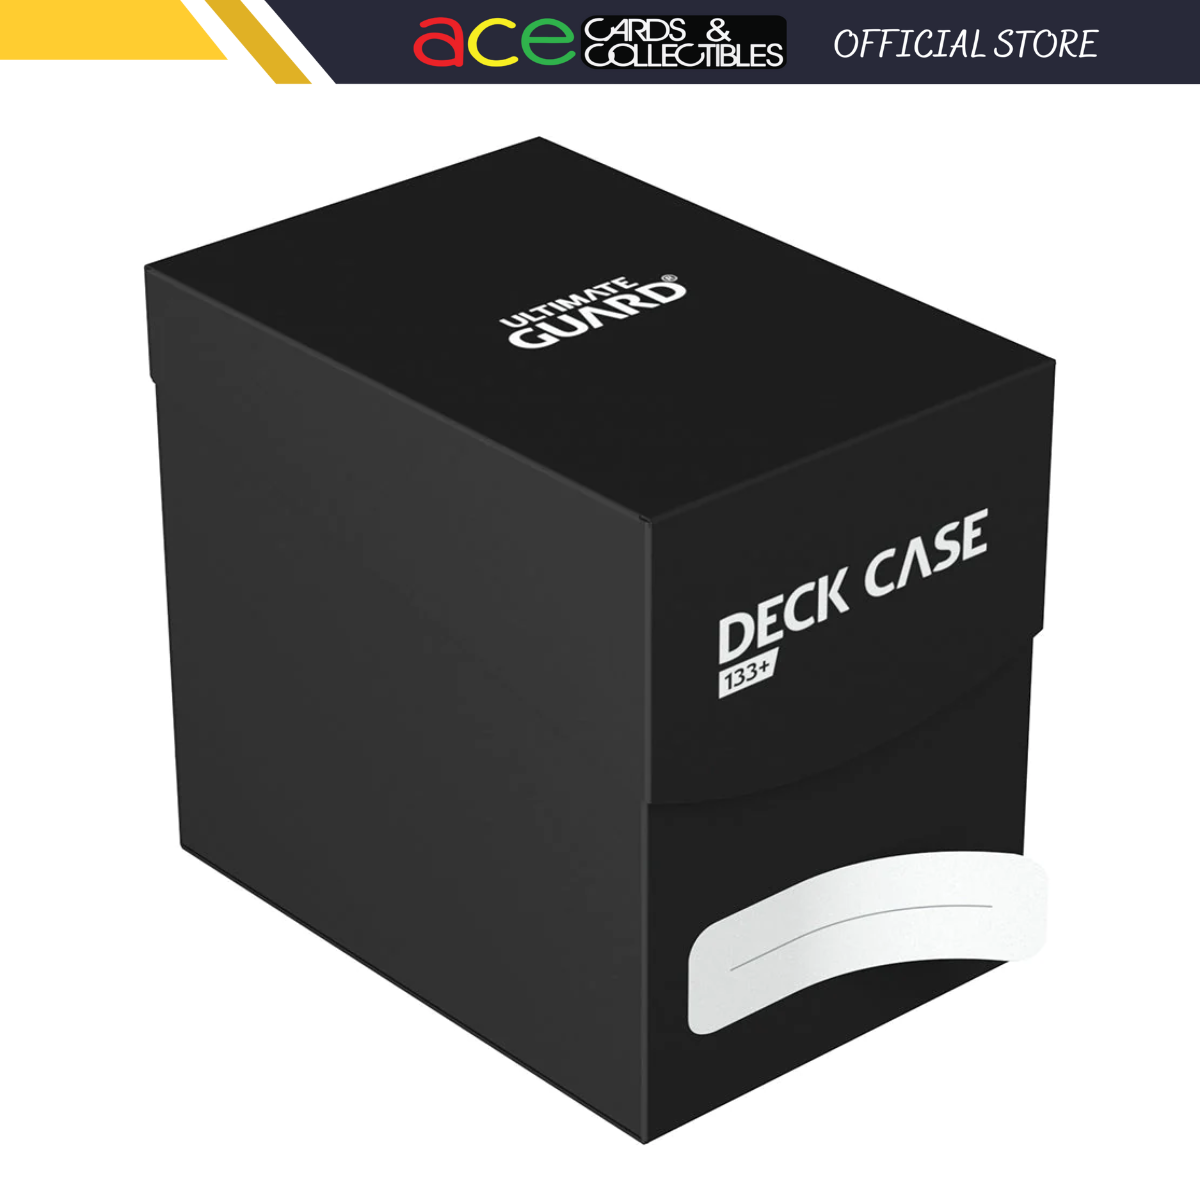 Ultimate Guard Deck Case 133+ Standard Size - Black (Deck Box)-Ultimate Guard-Ace Cards & Collectibles